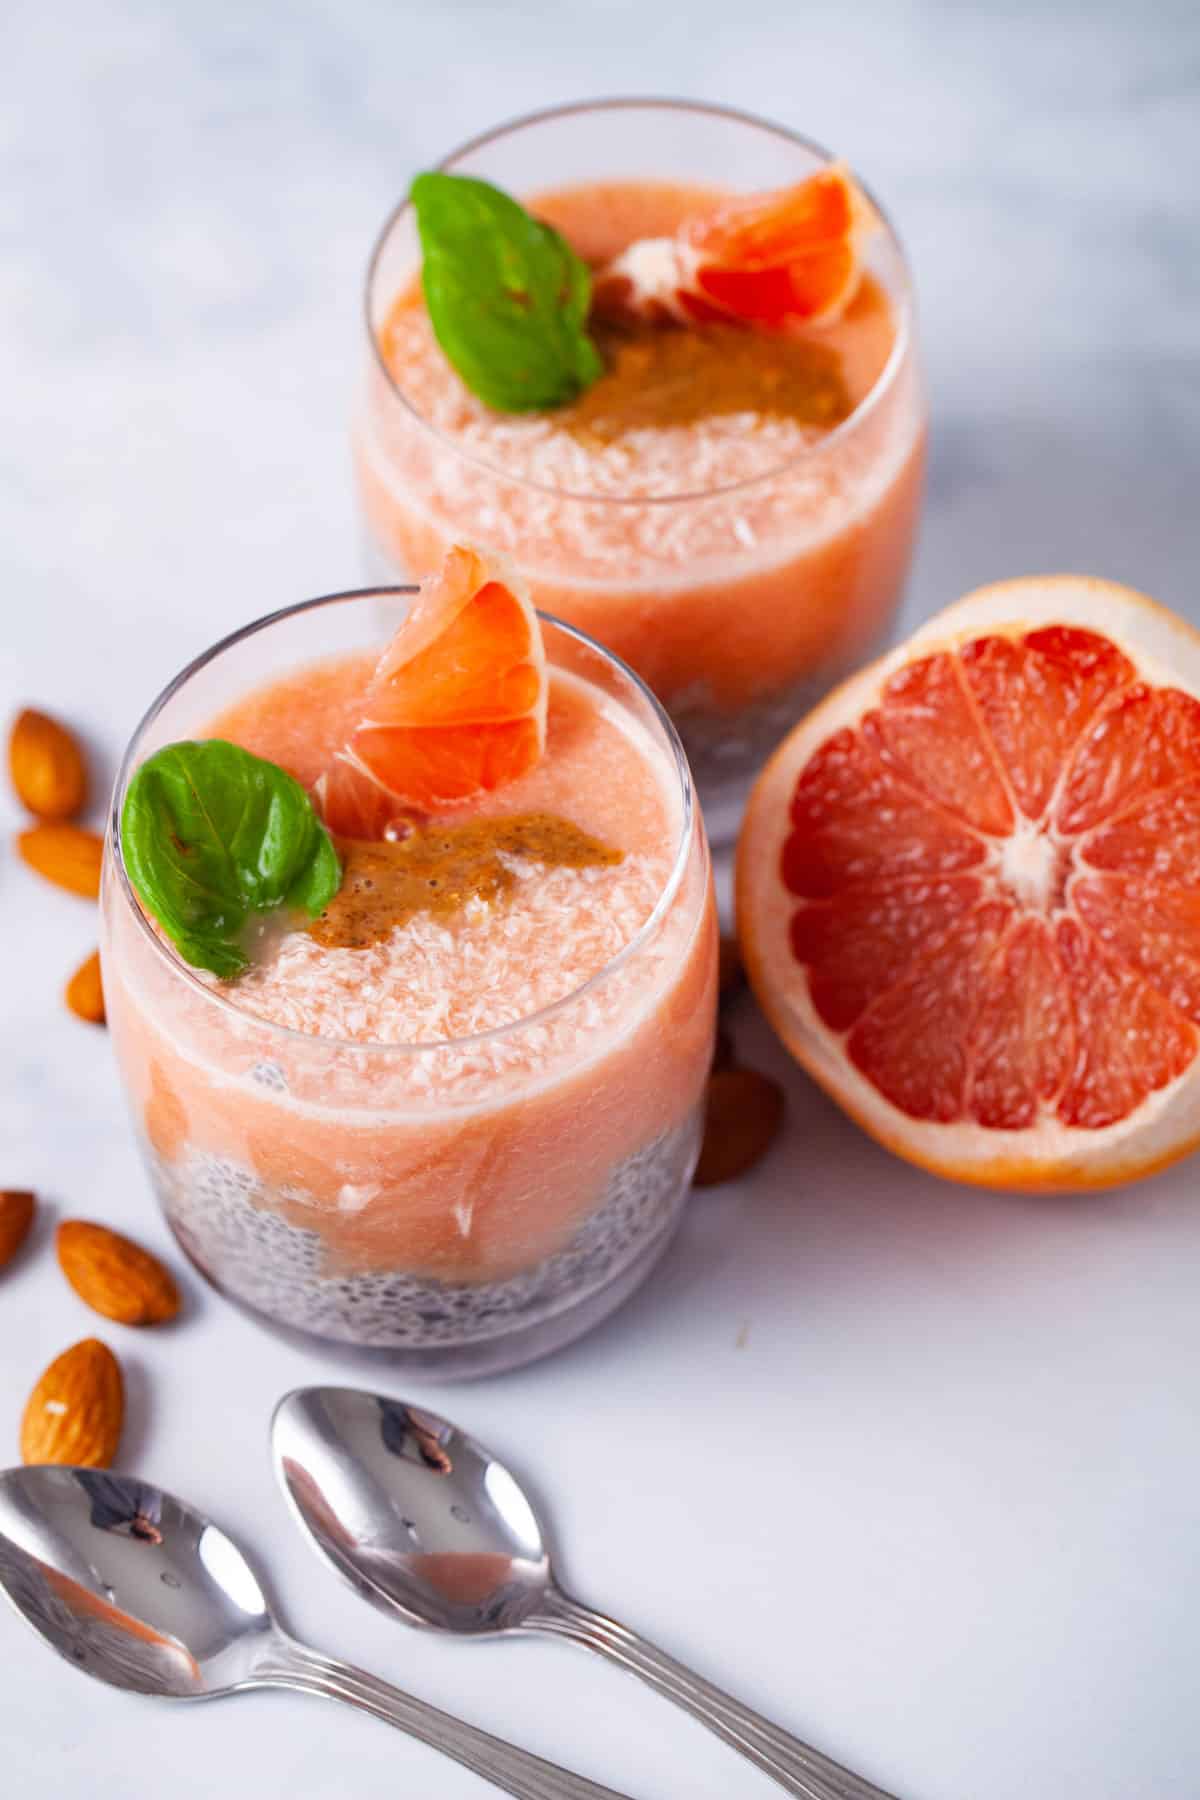 Two glasses filled with chia pudding, infused with a grapefruit sauce, topped with almond butter, Basil leaves, coconut shreds, and slices of grapefruit.